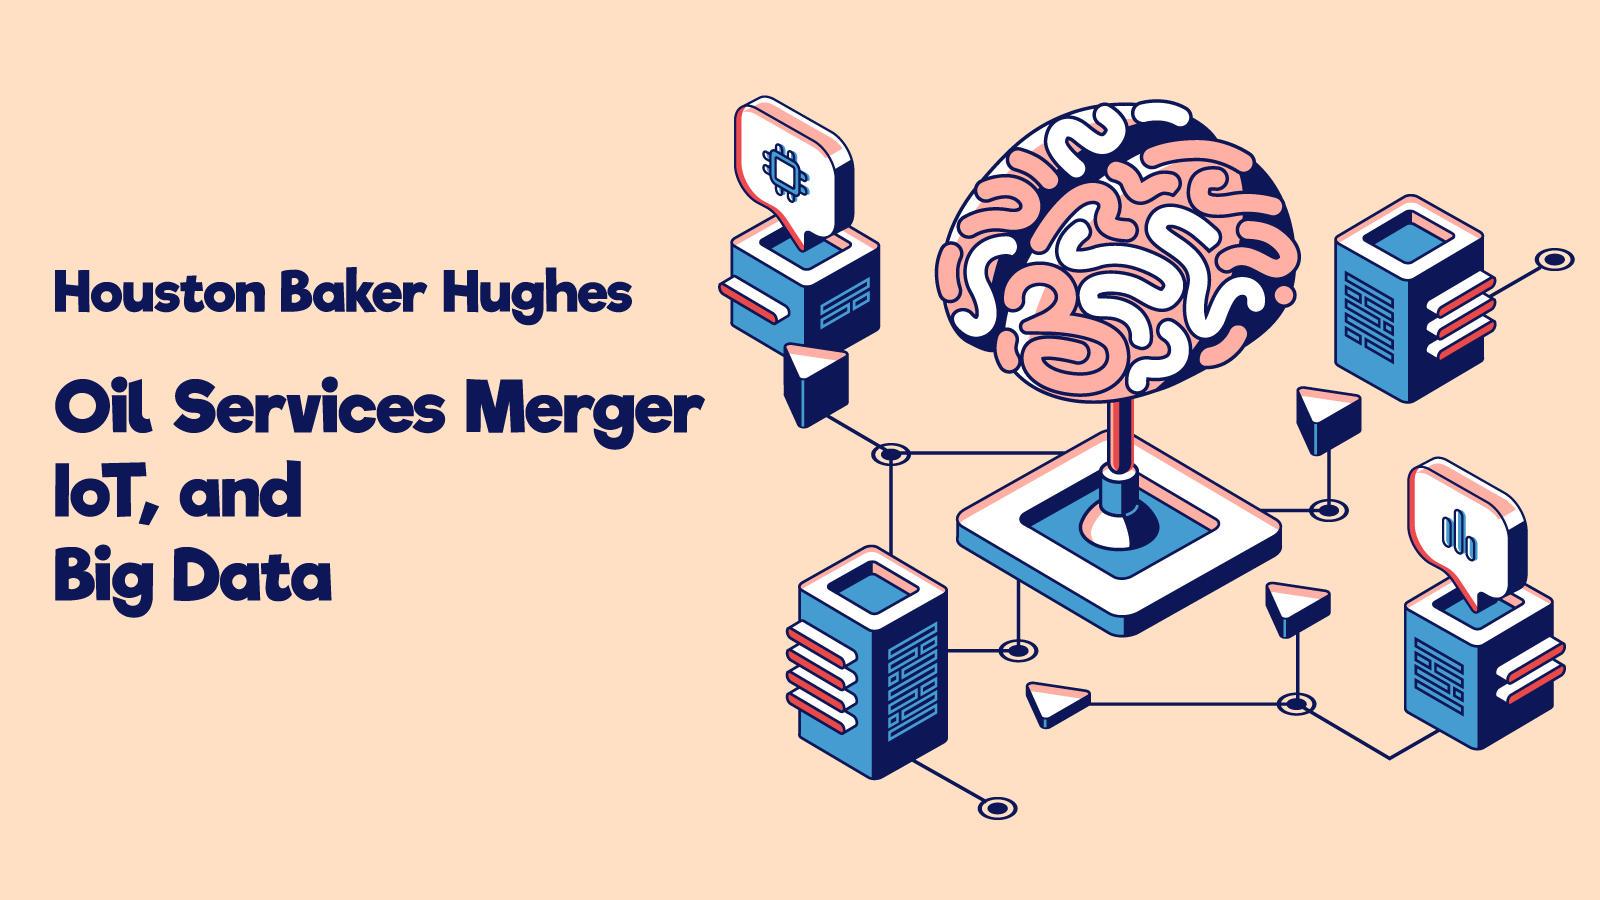 Houston Baker Hughes Oil Services Merger, IoT, and Big Data